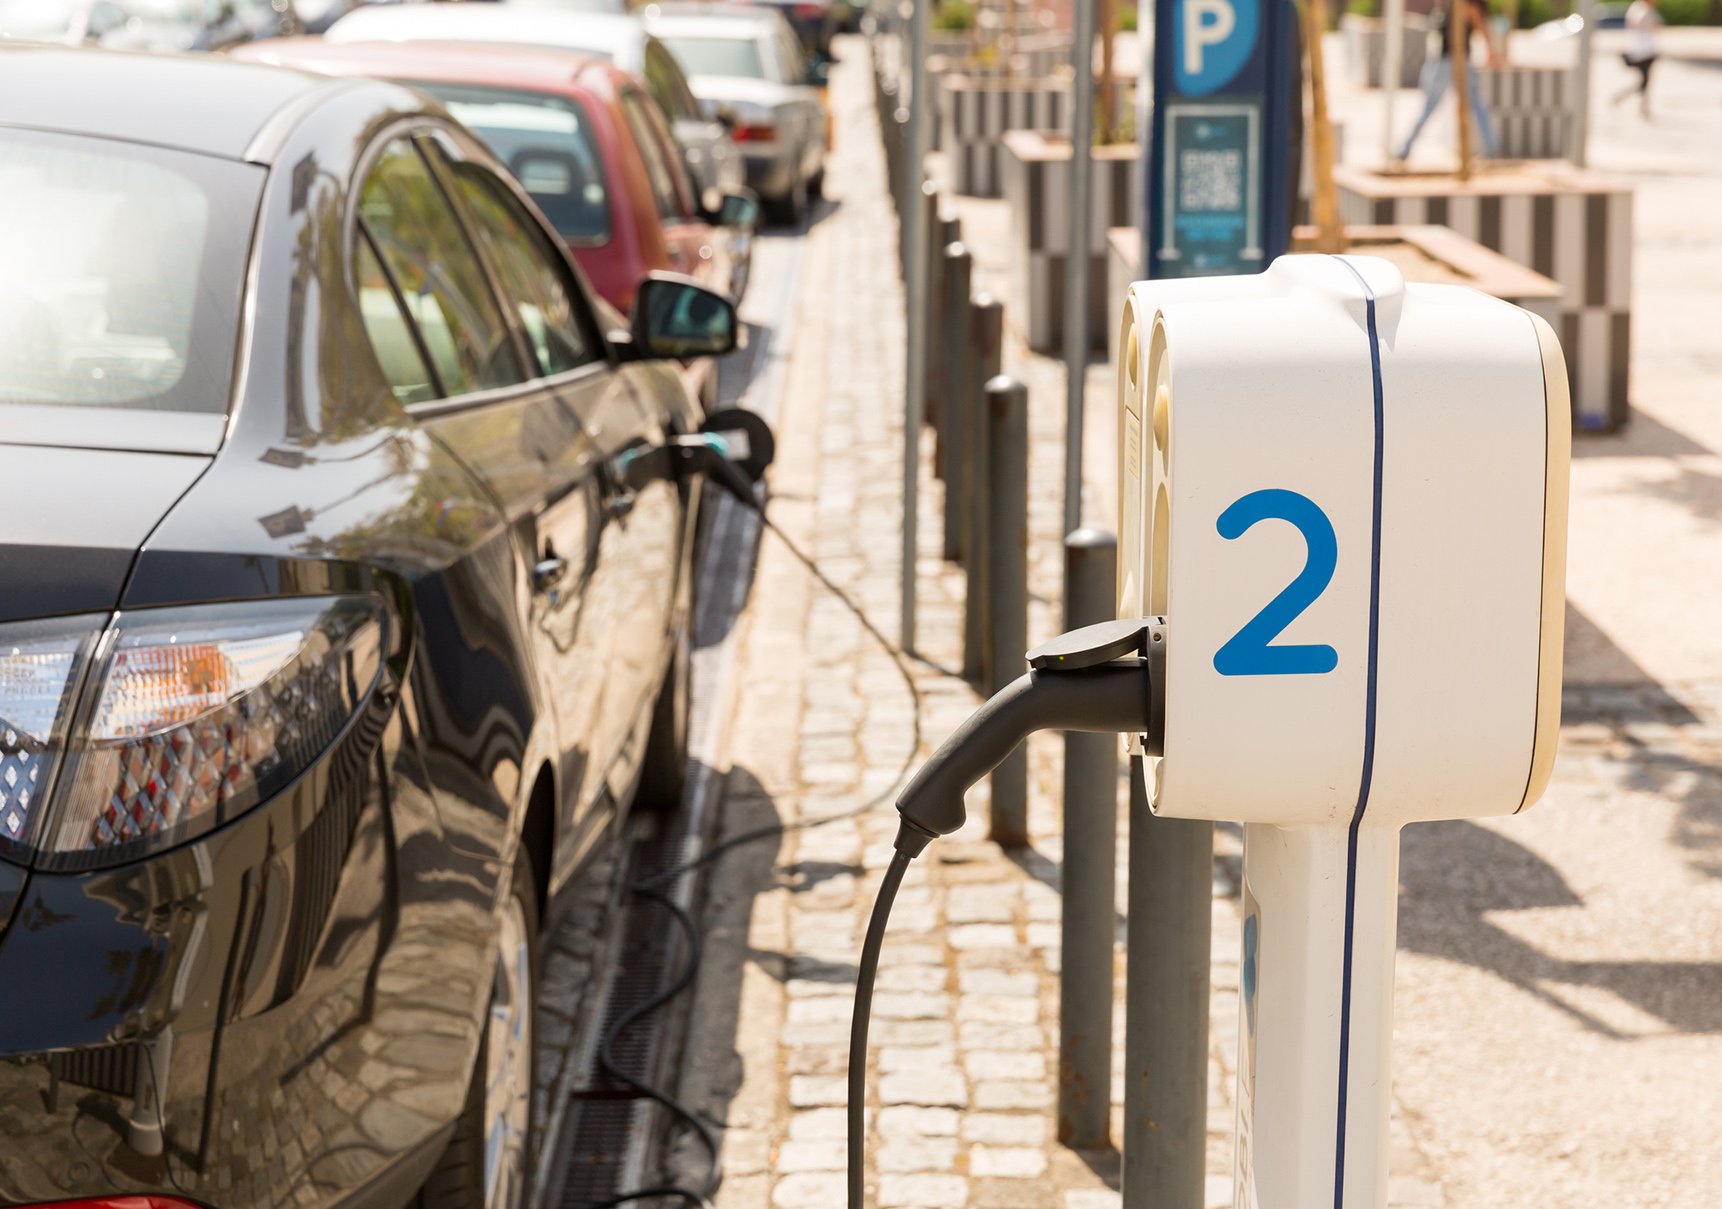 Utilities & Electric Vehicles: Case Studies from the Field